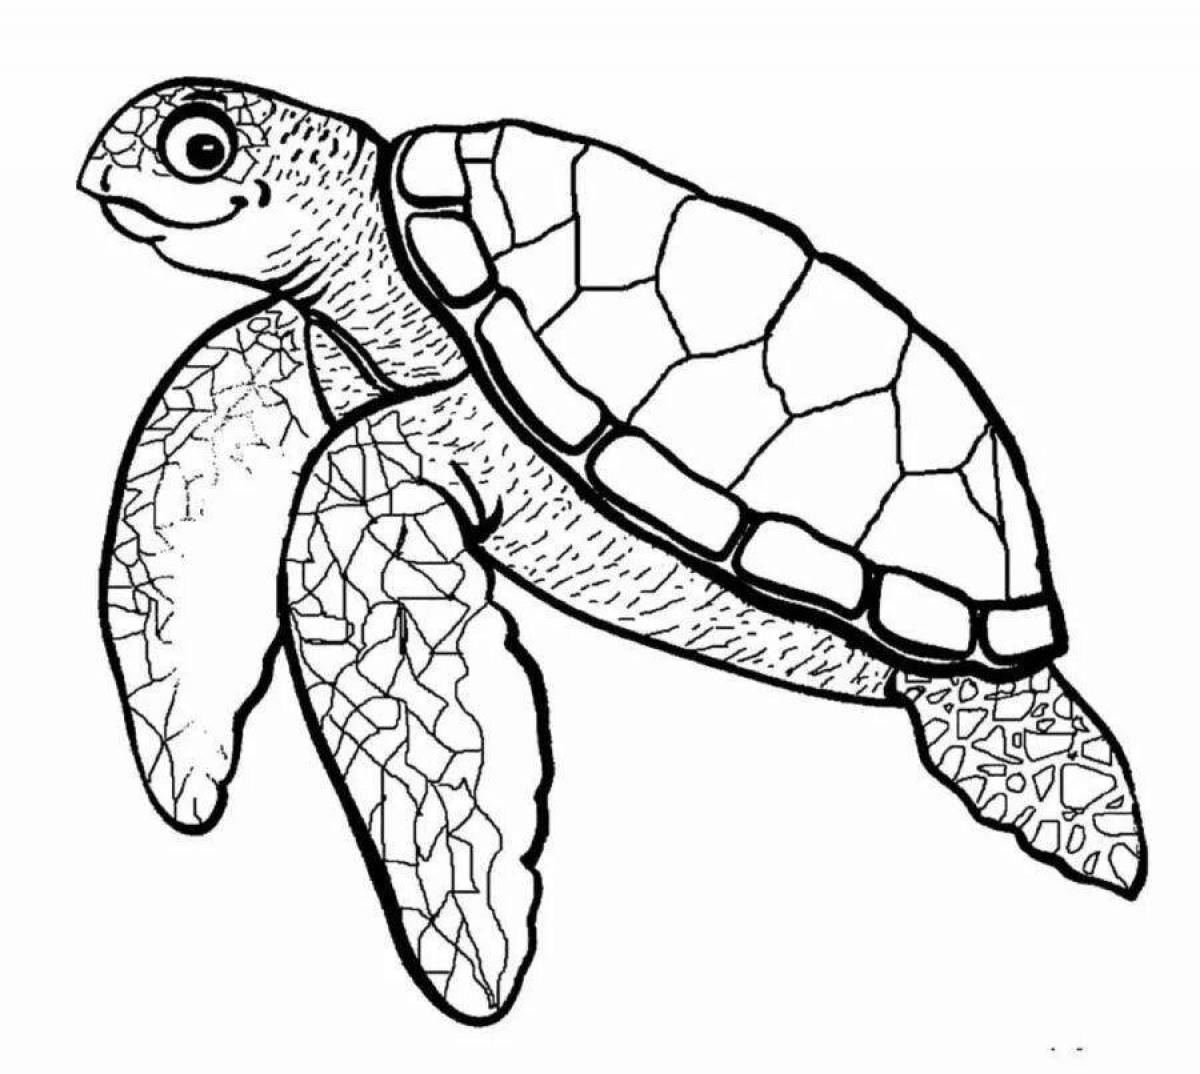 A fascinating sea turtle coloring book